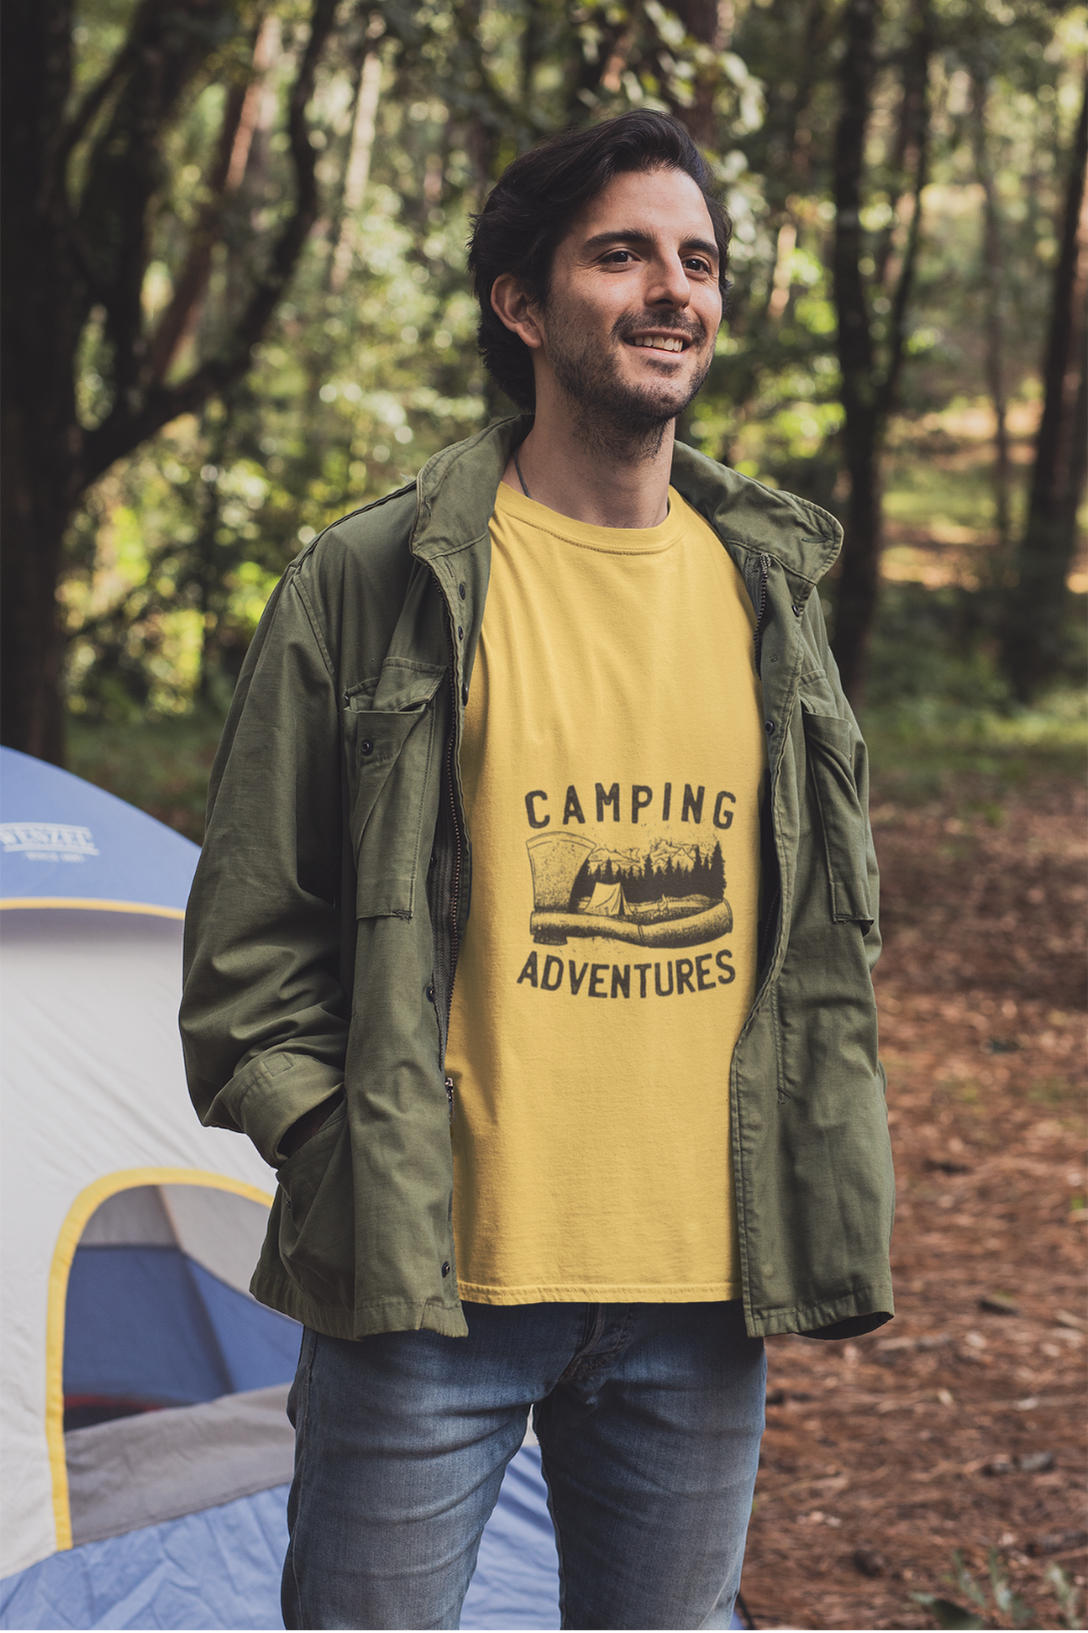 Camping Adventures Printed T-Shirt For Men - WowWaves